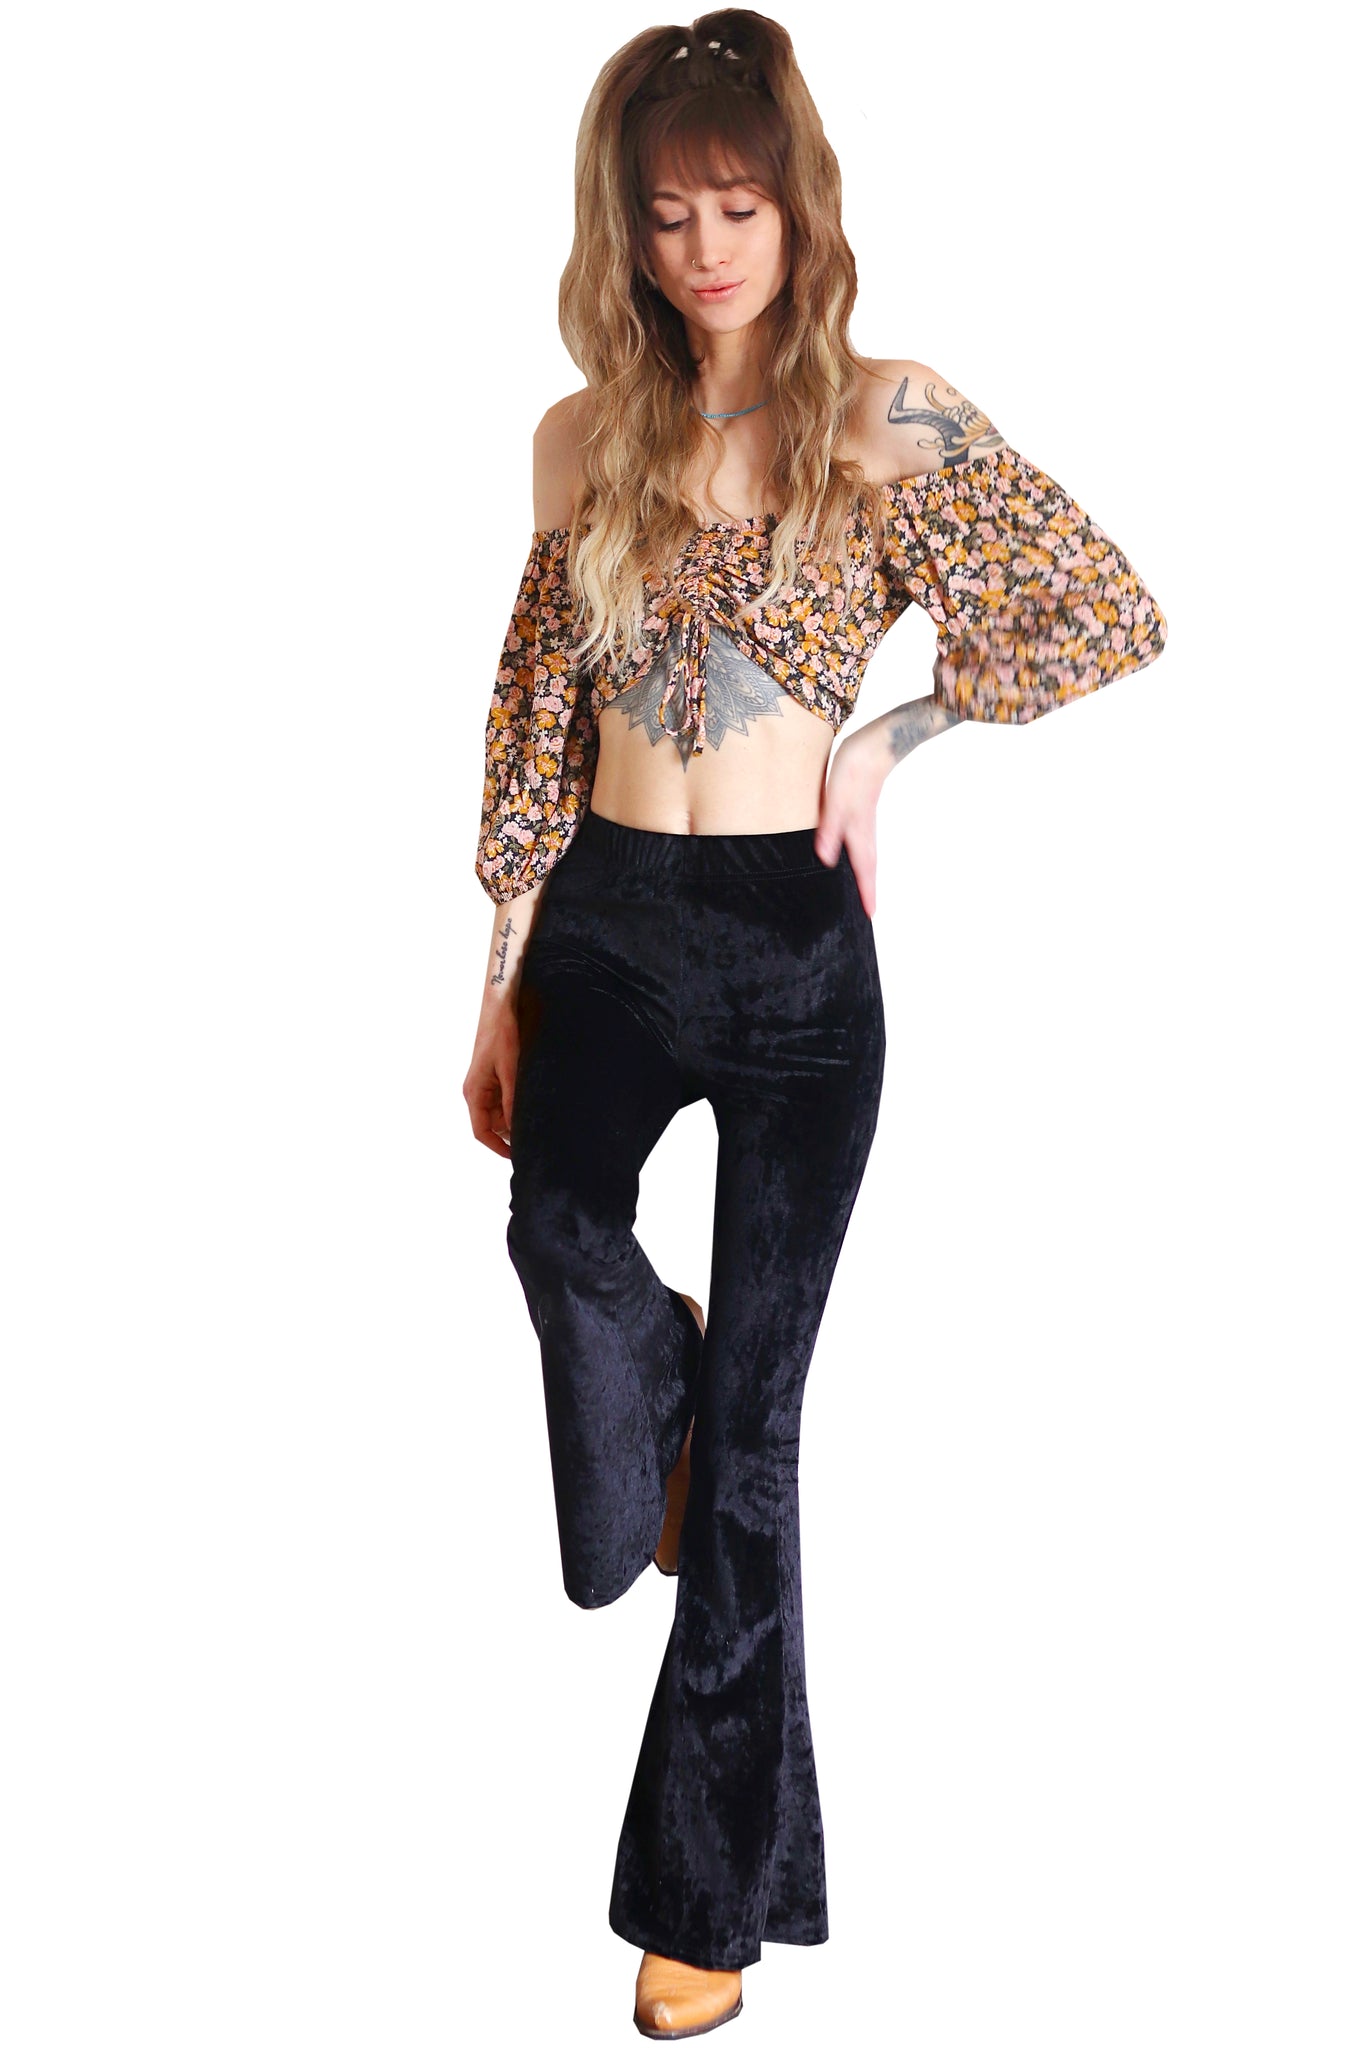 Rock These Mustard High Waisted Velvet Flare Bell Bottom Pants during the  Holidays - Sincerely, K